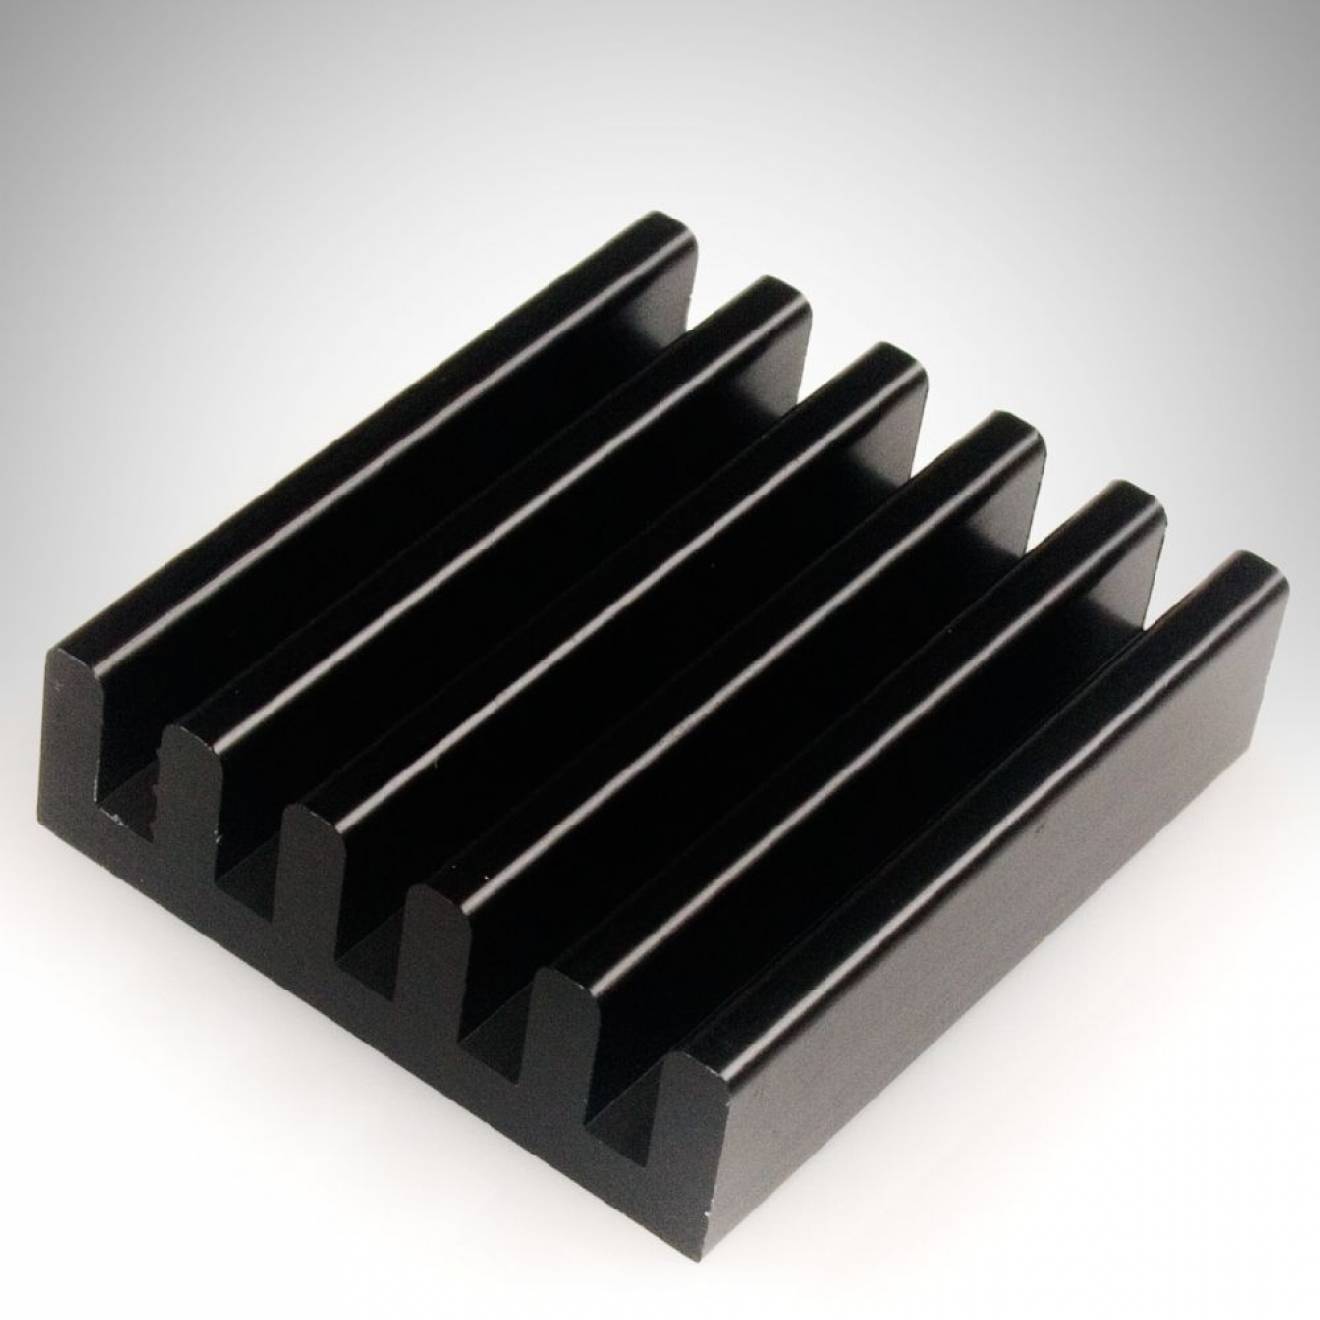 Heat Sink For Power Leds Size 1